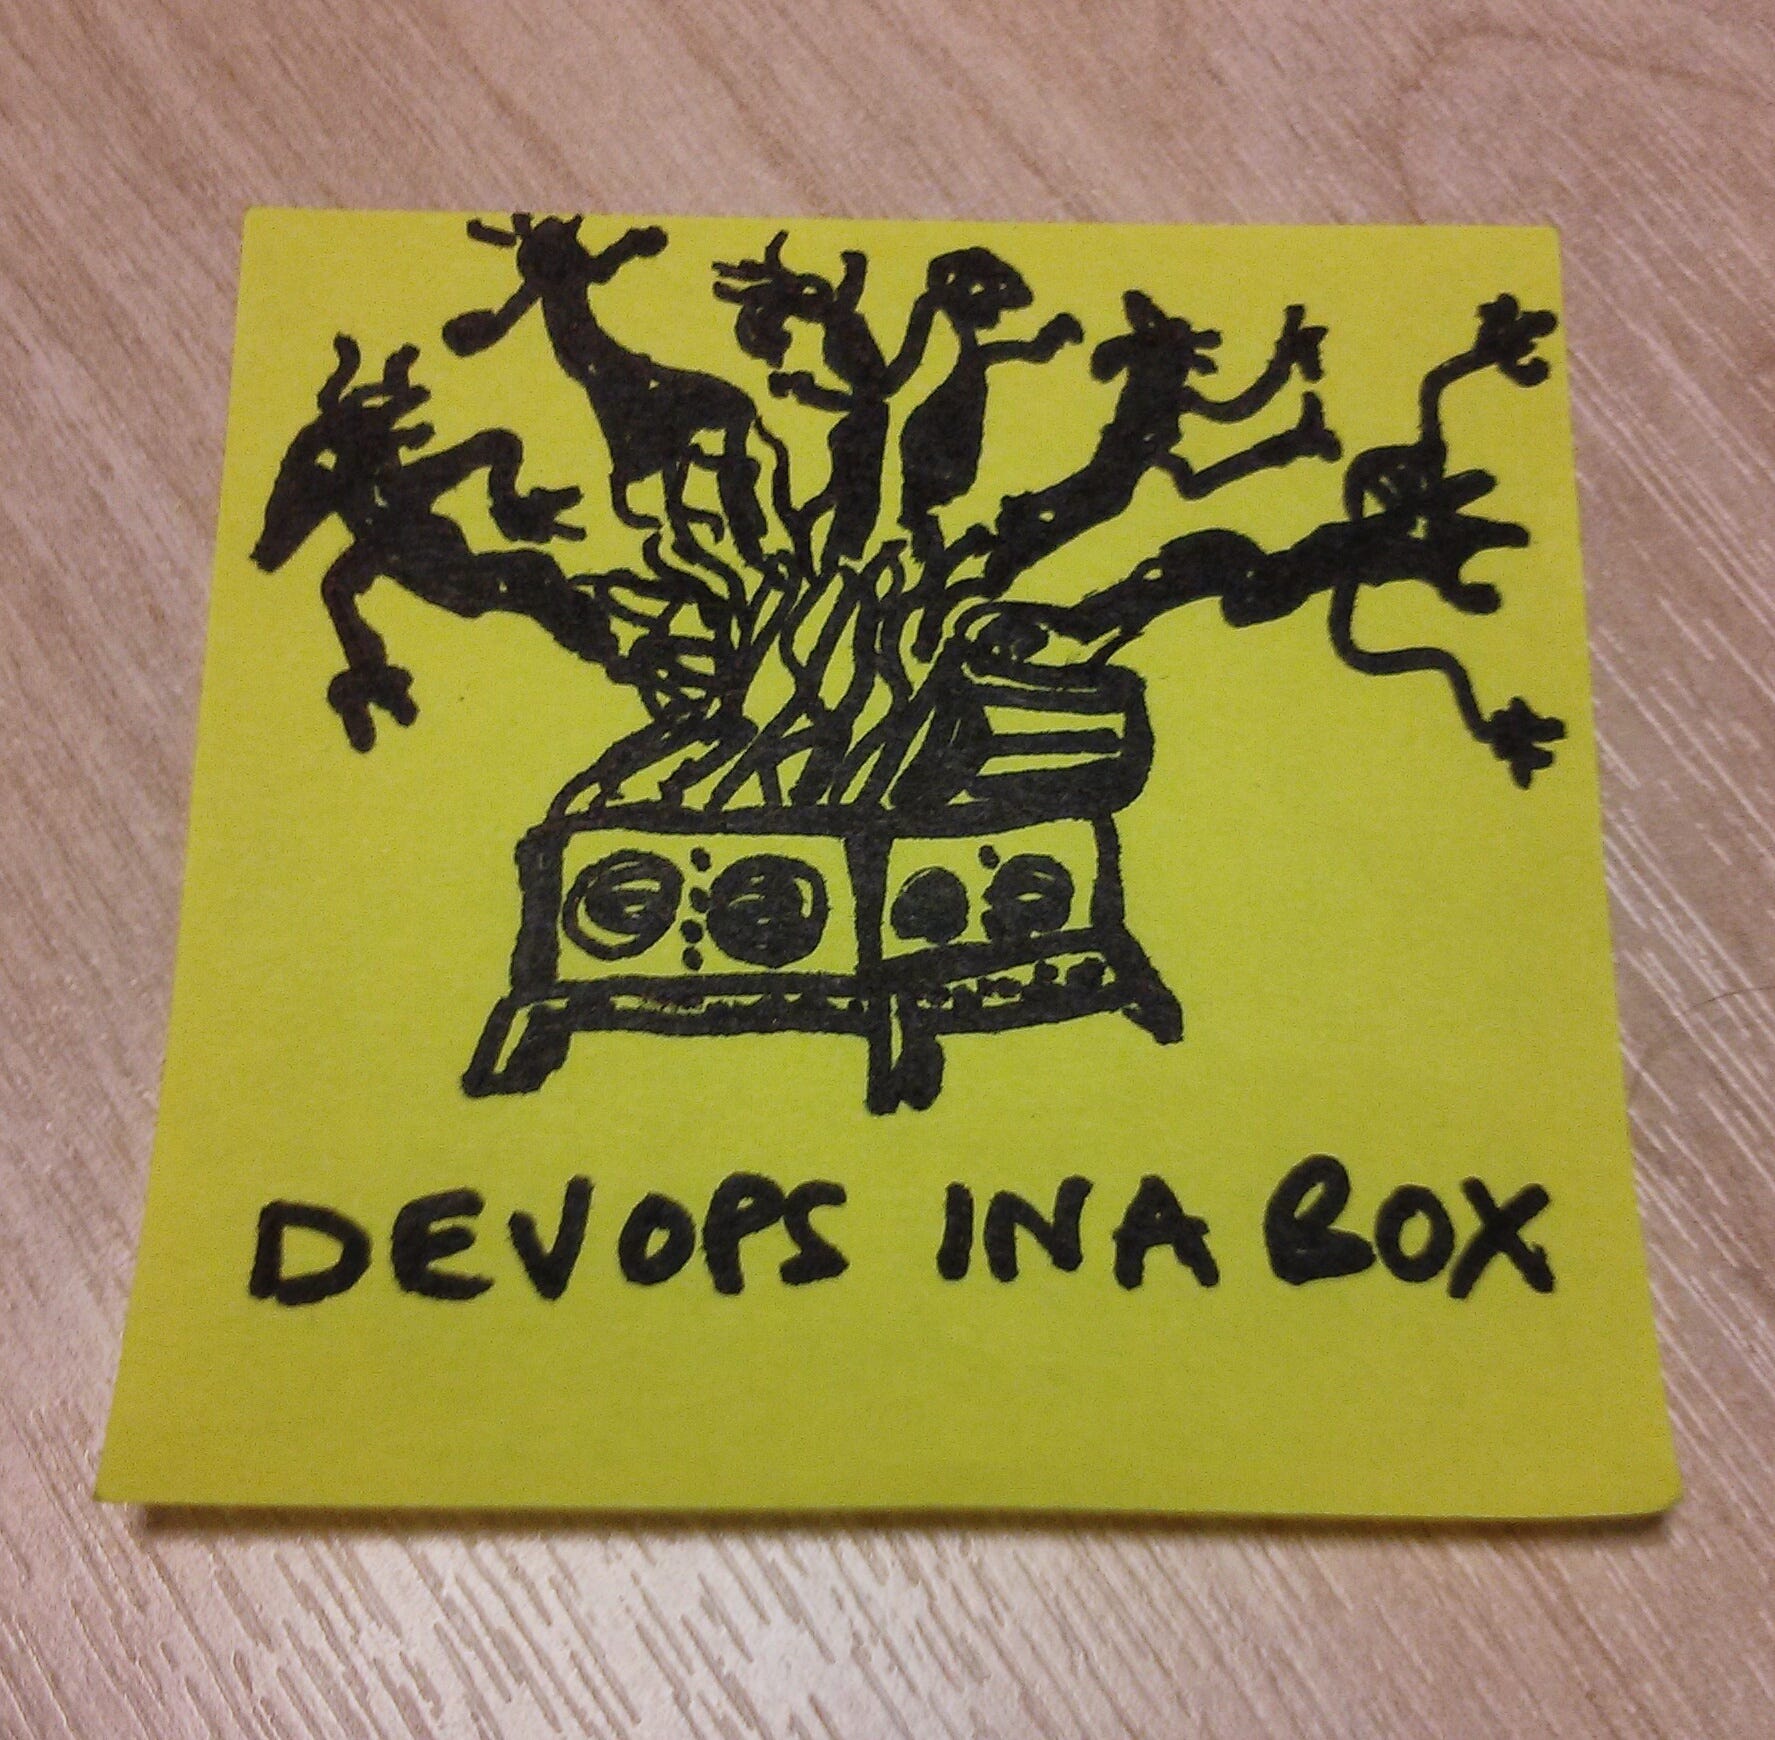 "devops in a box" by psd is licensed under CC BY 2.0 